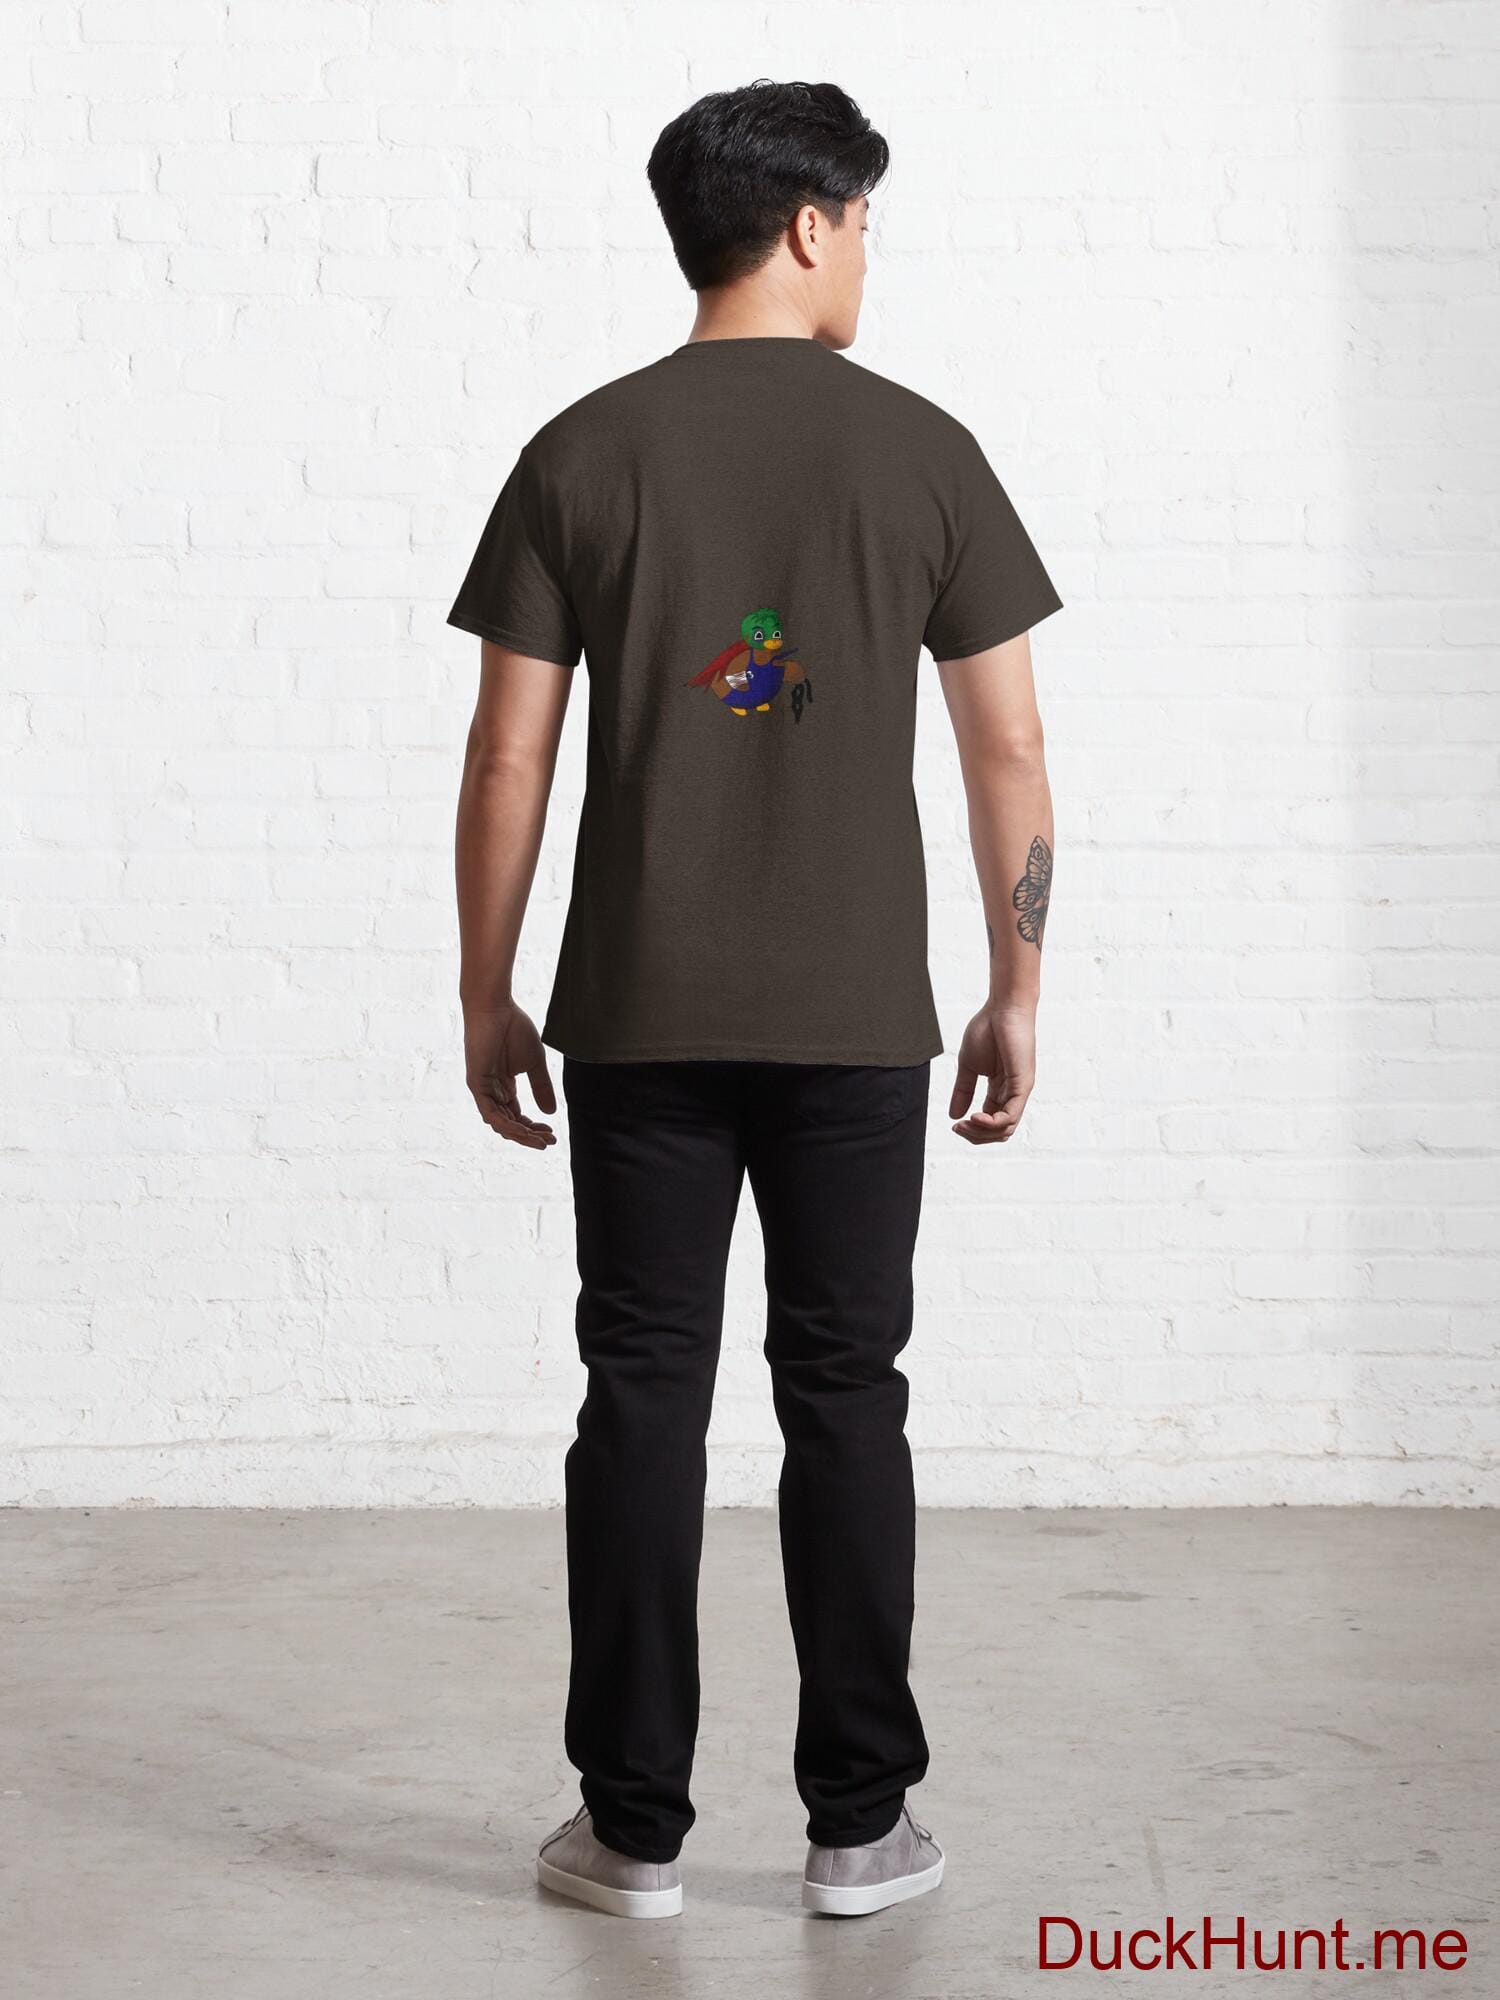 Dead DuckHunt Boss (smokeless) Brown Classic T-Shirt (Back printed) alternative image 3